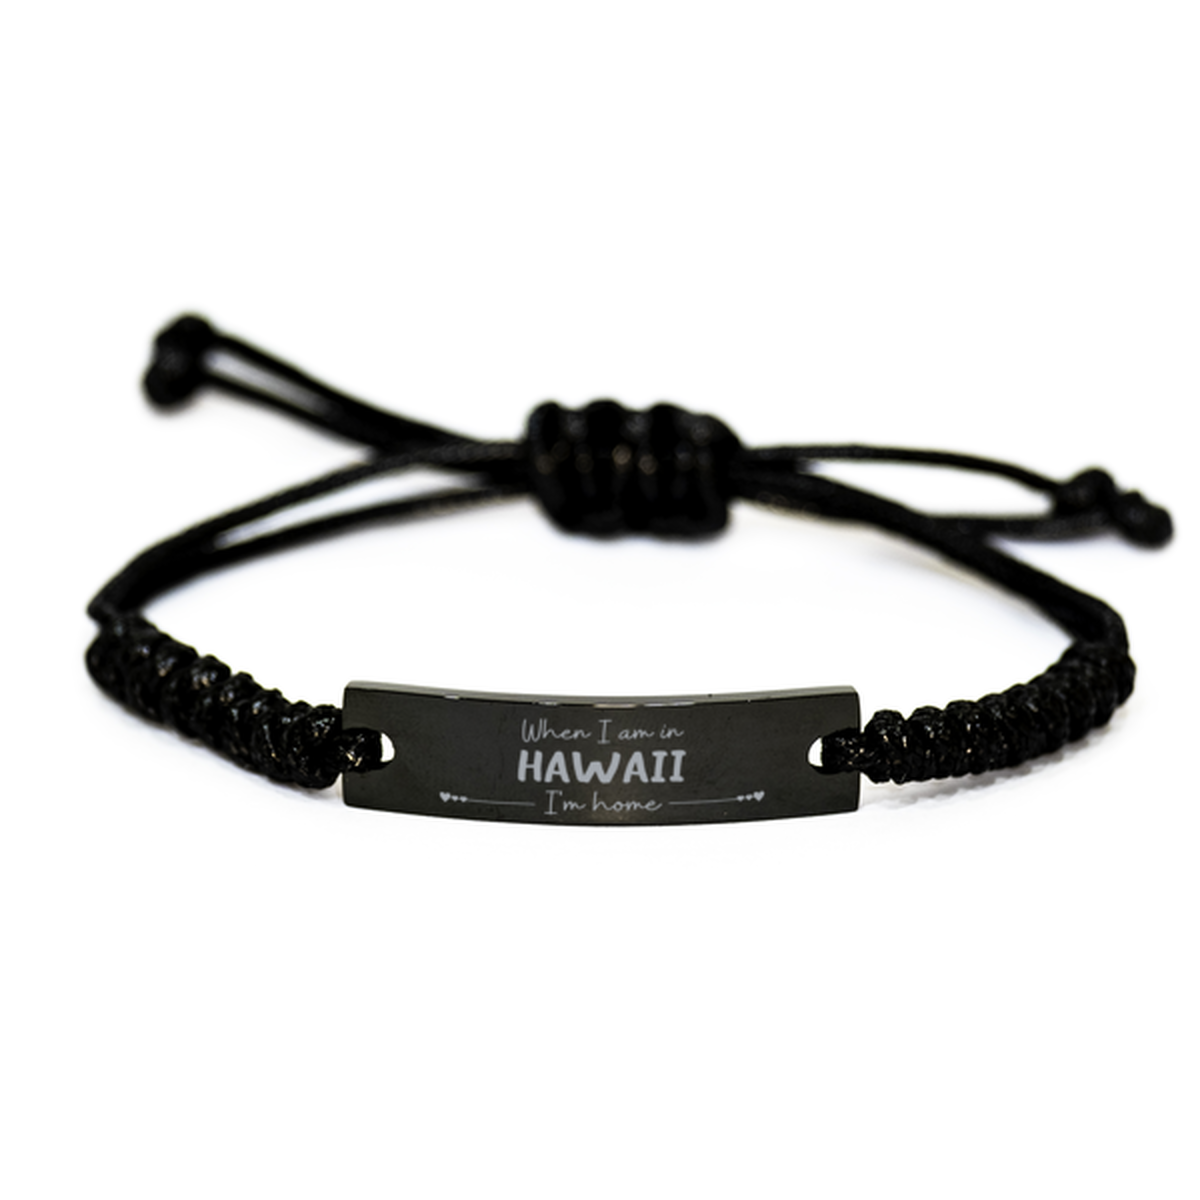 When I am in Hawaii I'm home Black Rope Bracelet, Cheap Gifts For Hawaii, State Hawaii Birthday Gifts for Friends Coworker